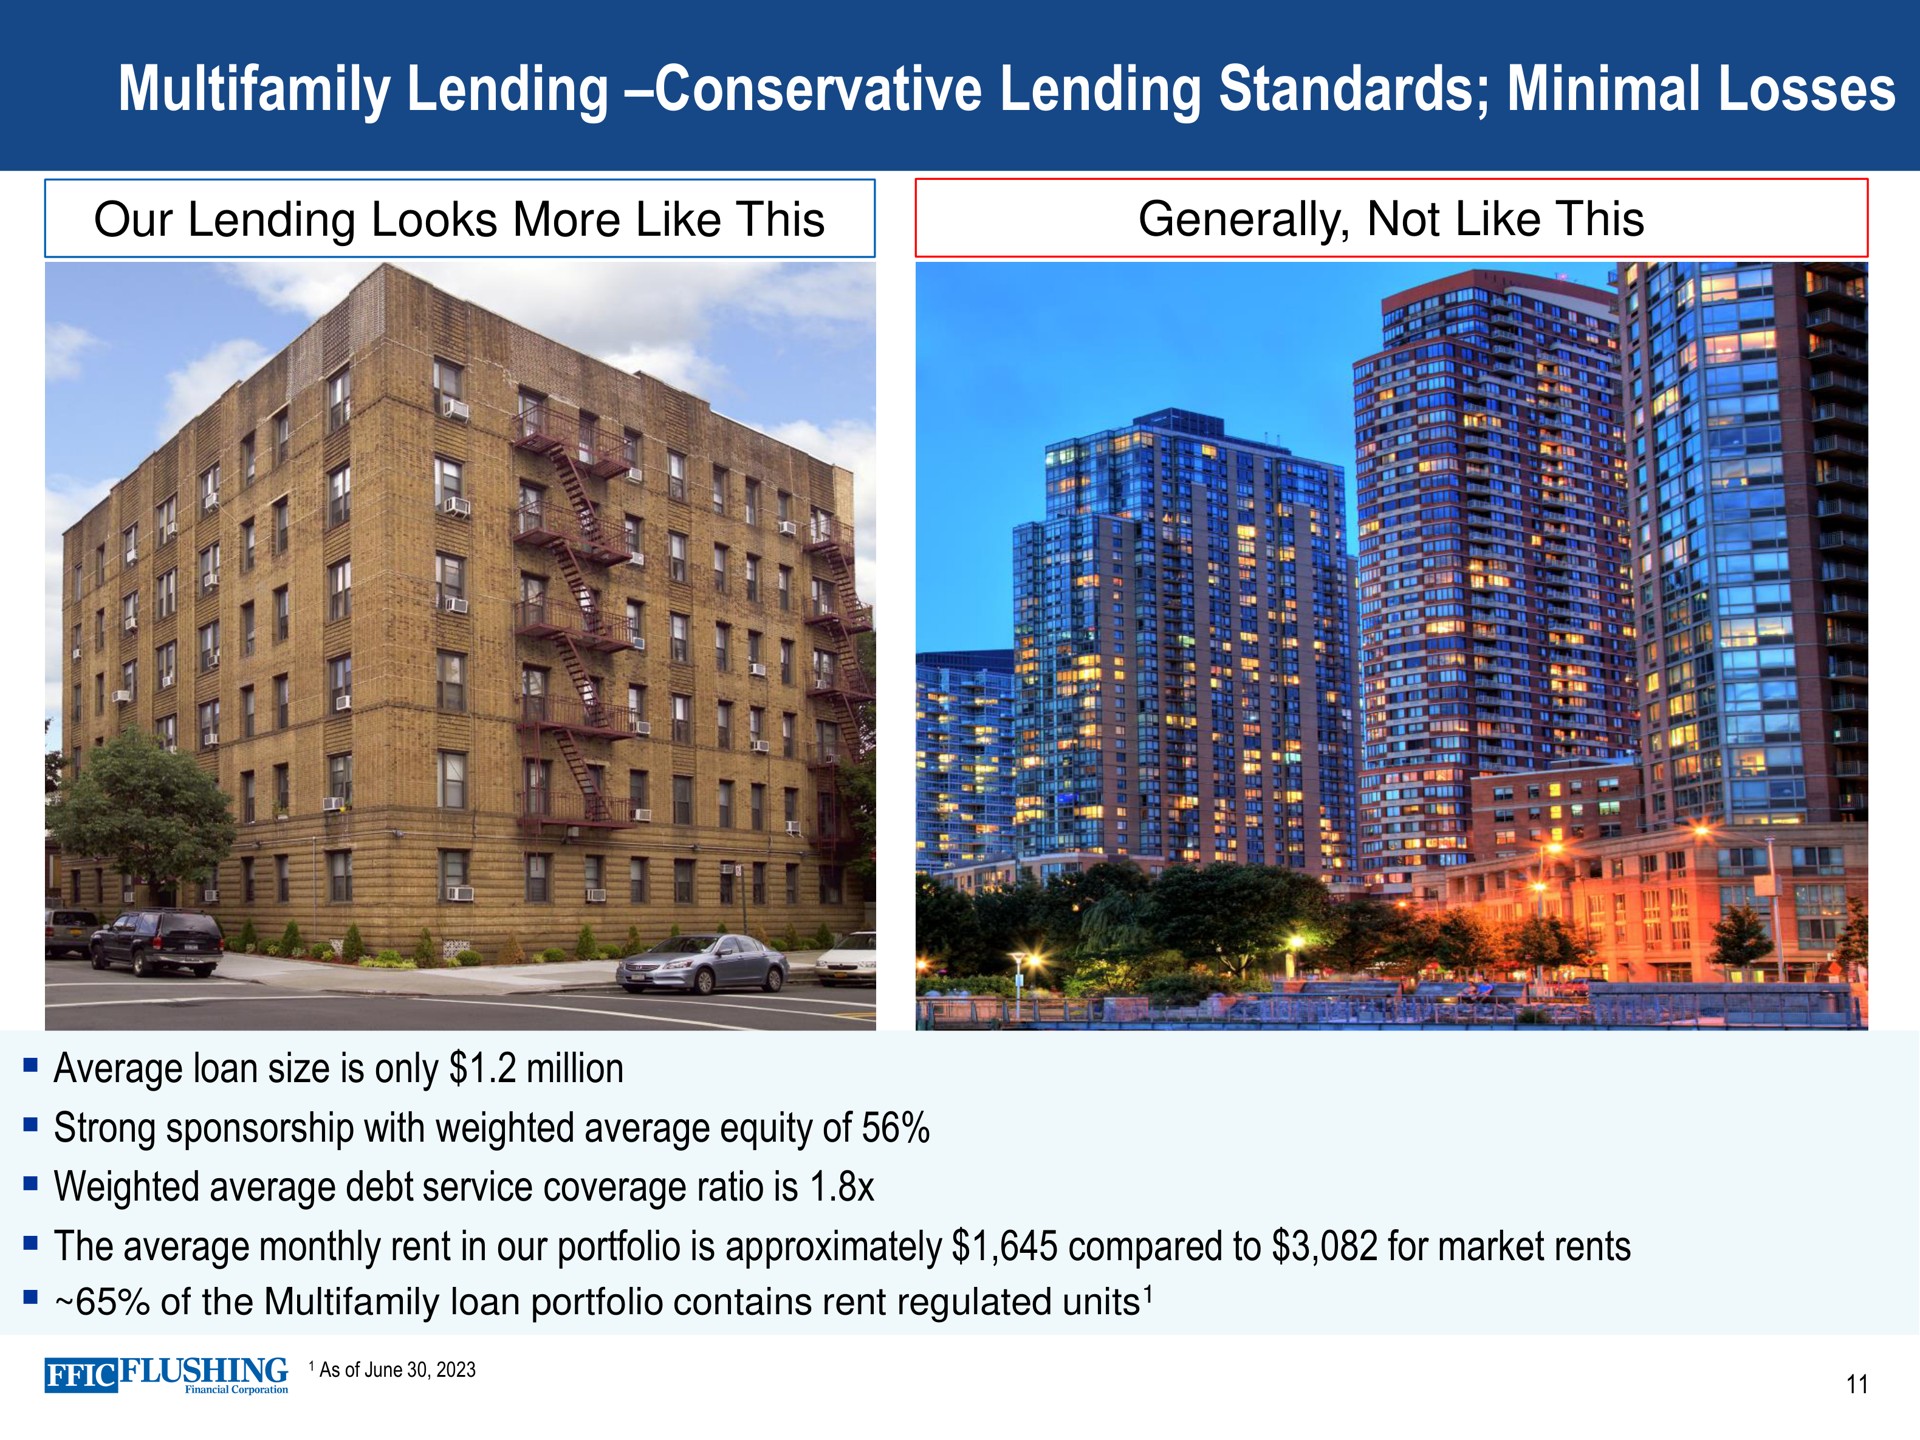 lending conservative lending standards minimal losses our looks more like this generally not like this a a am of the loan portfolio contains rent regulated units average loan size is only million strong sponsorship with weighted average equity of weighted average debt service coverage ratio is the average monthly rent in our portfolio is approximately compared to for market rents a ami tae | Flushing Financial